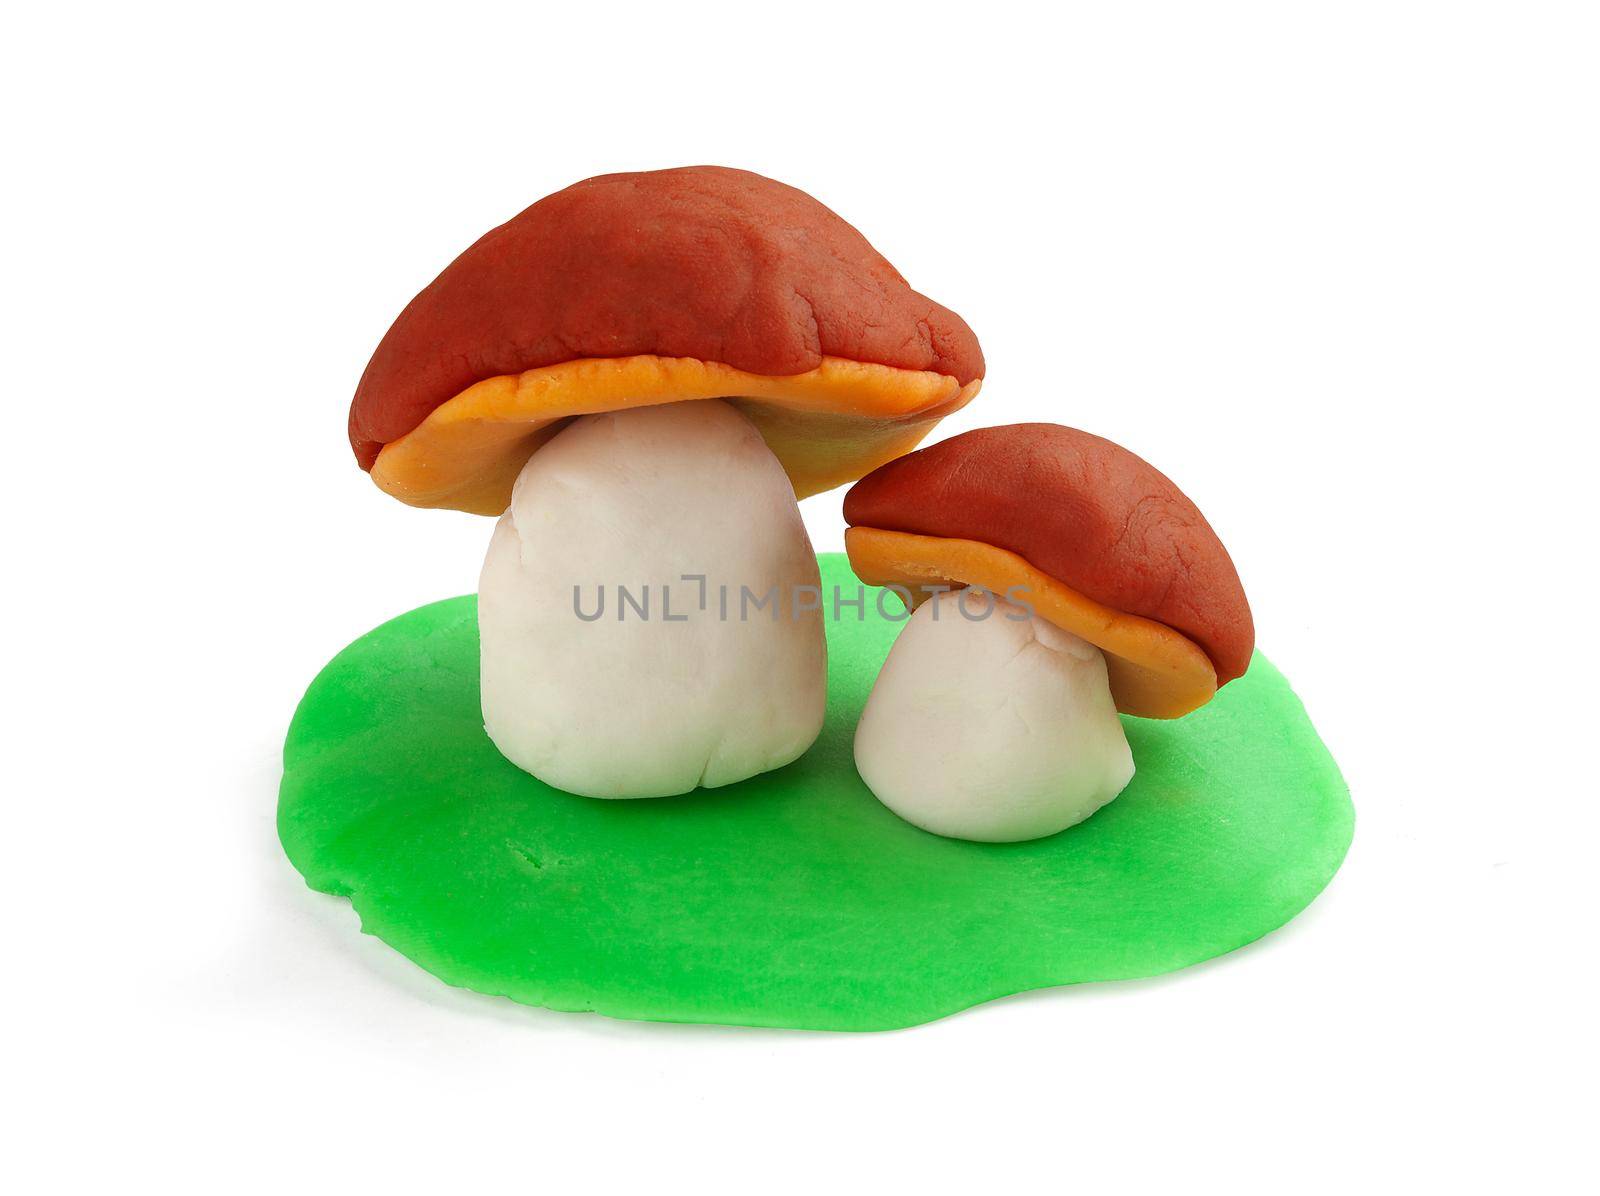 Isoalted plasticine mushrooms and grass on the white background